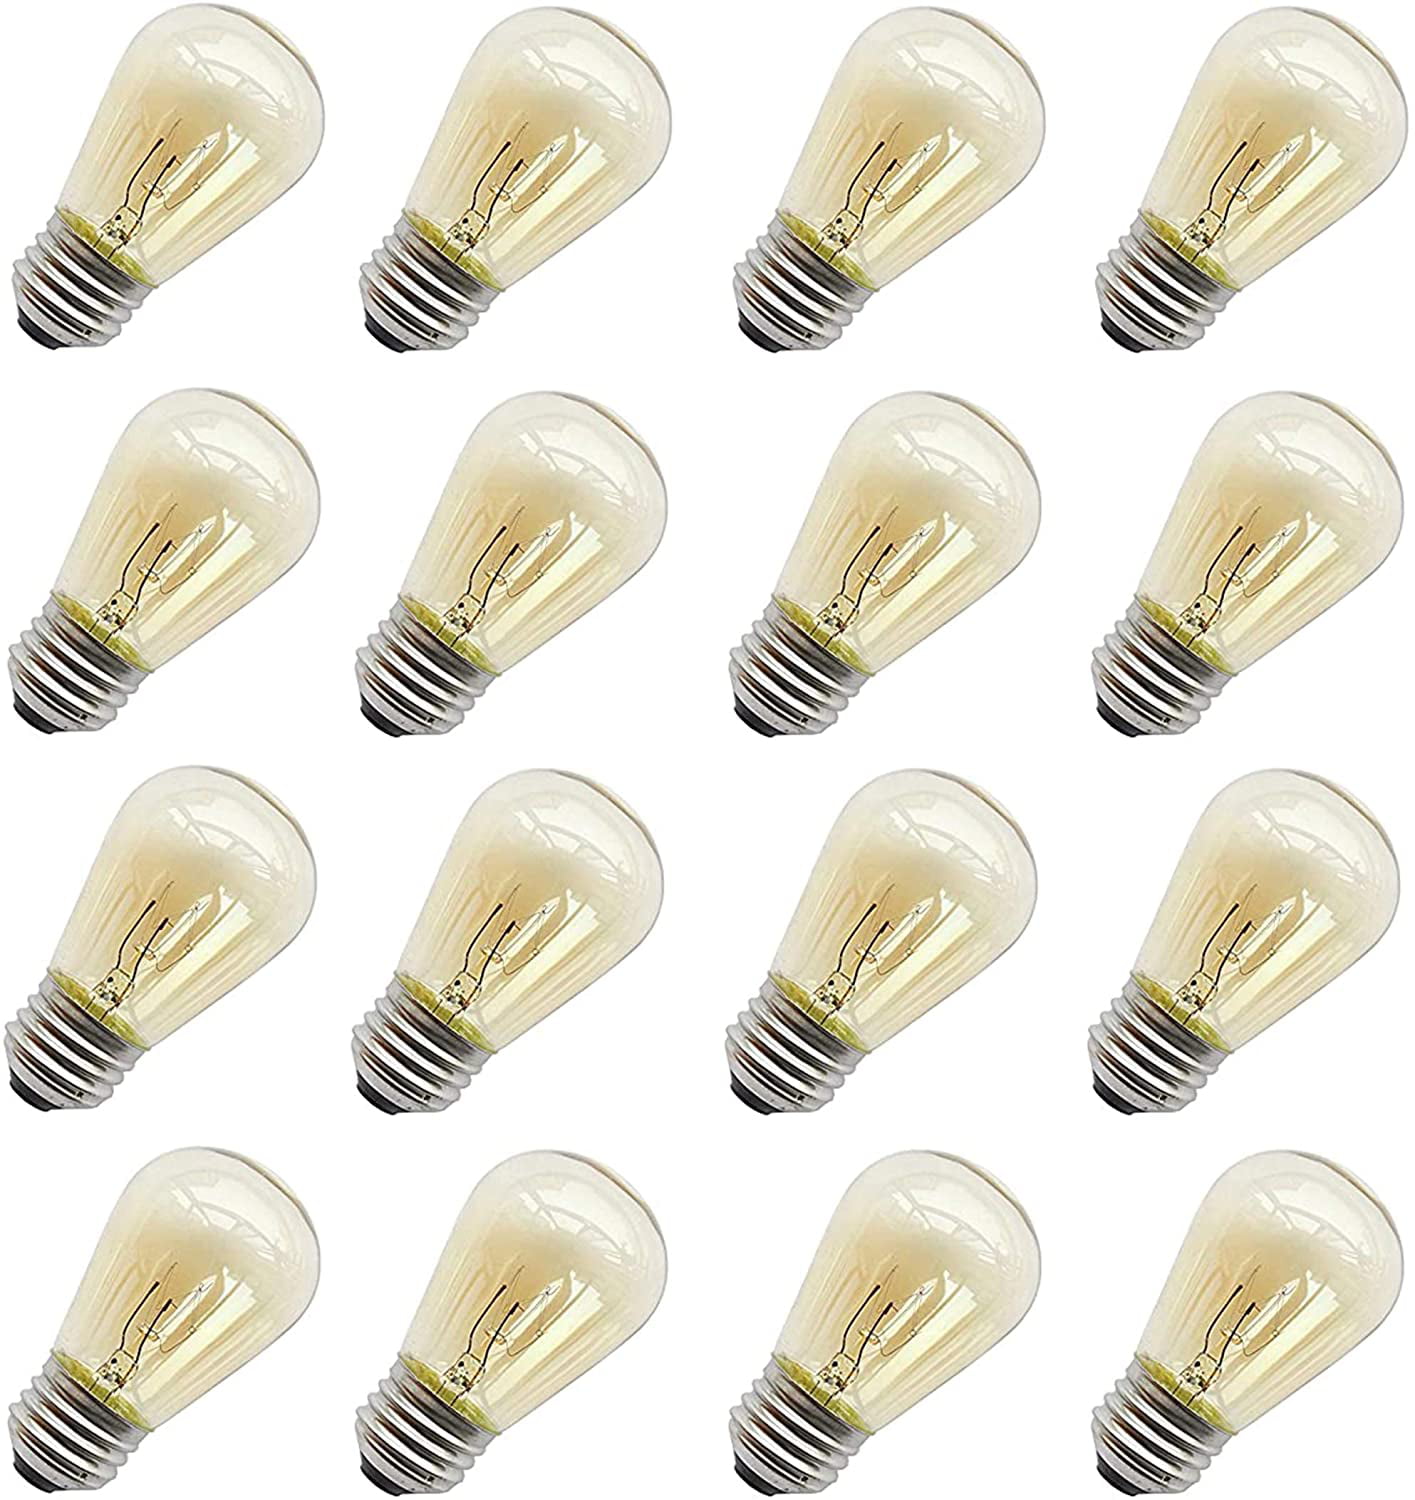 11 Watt Outdoor Light Bulbs Pack of 16 Clear Rolay S14 Warm Replacement Bulbs for Outdoor Patio String Lights with E26 Base